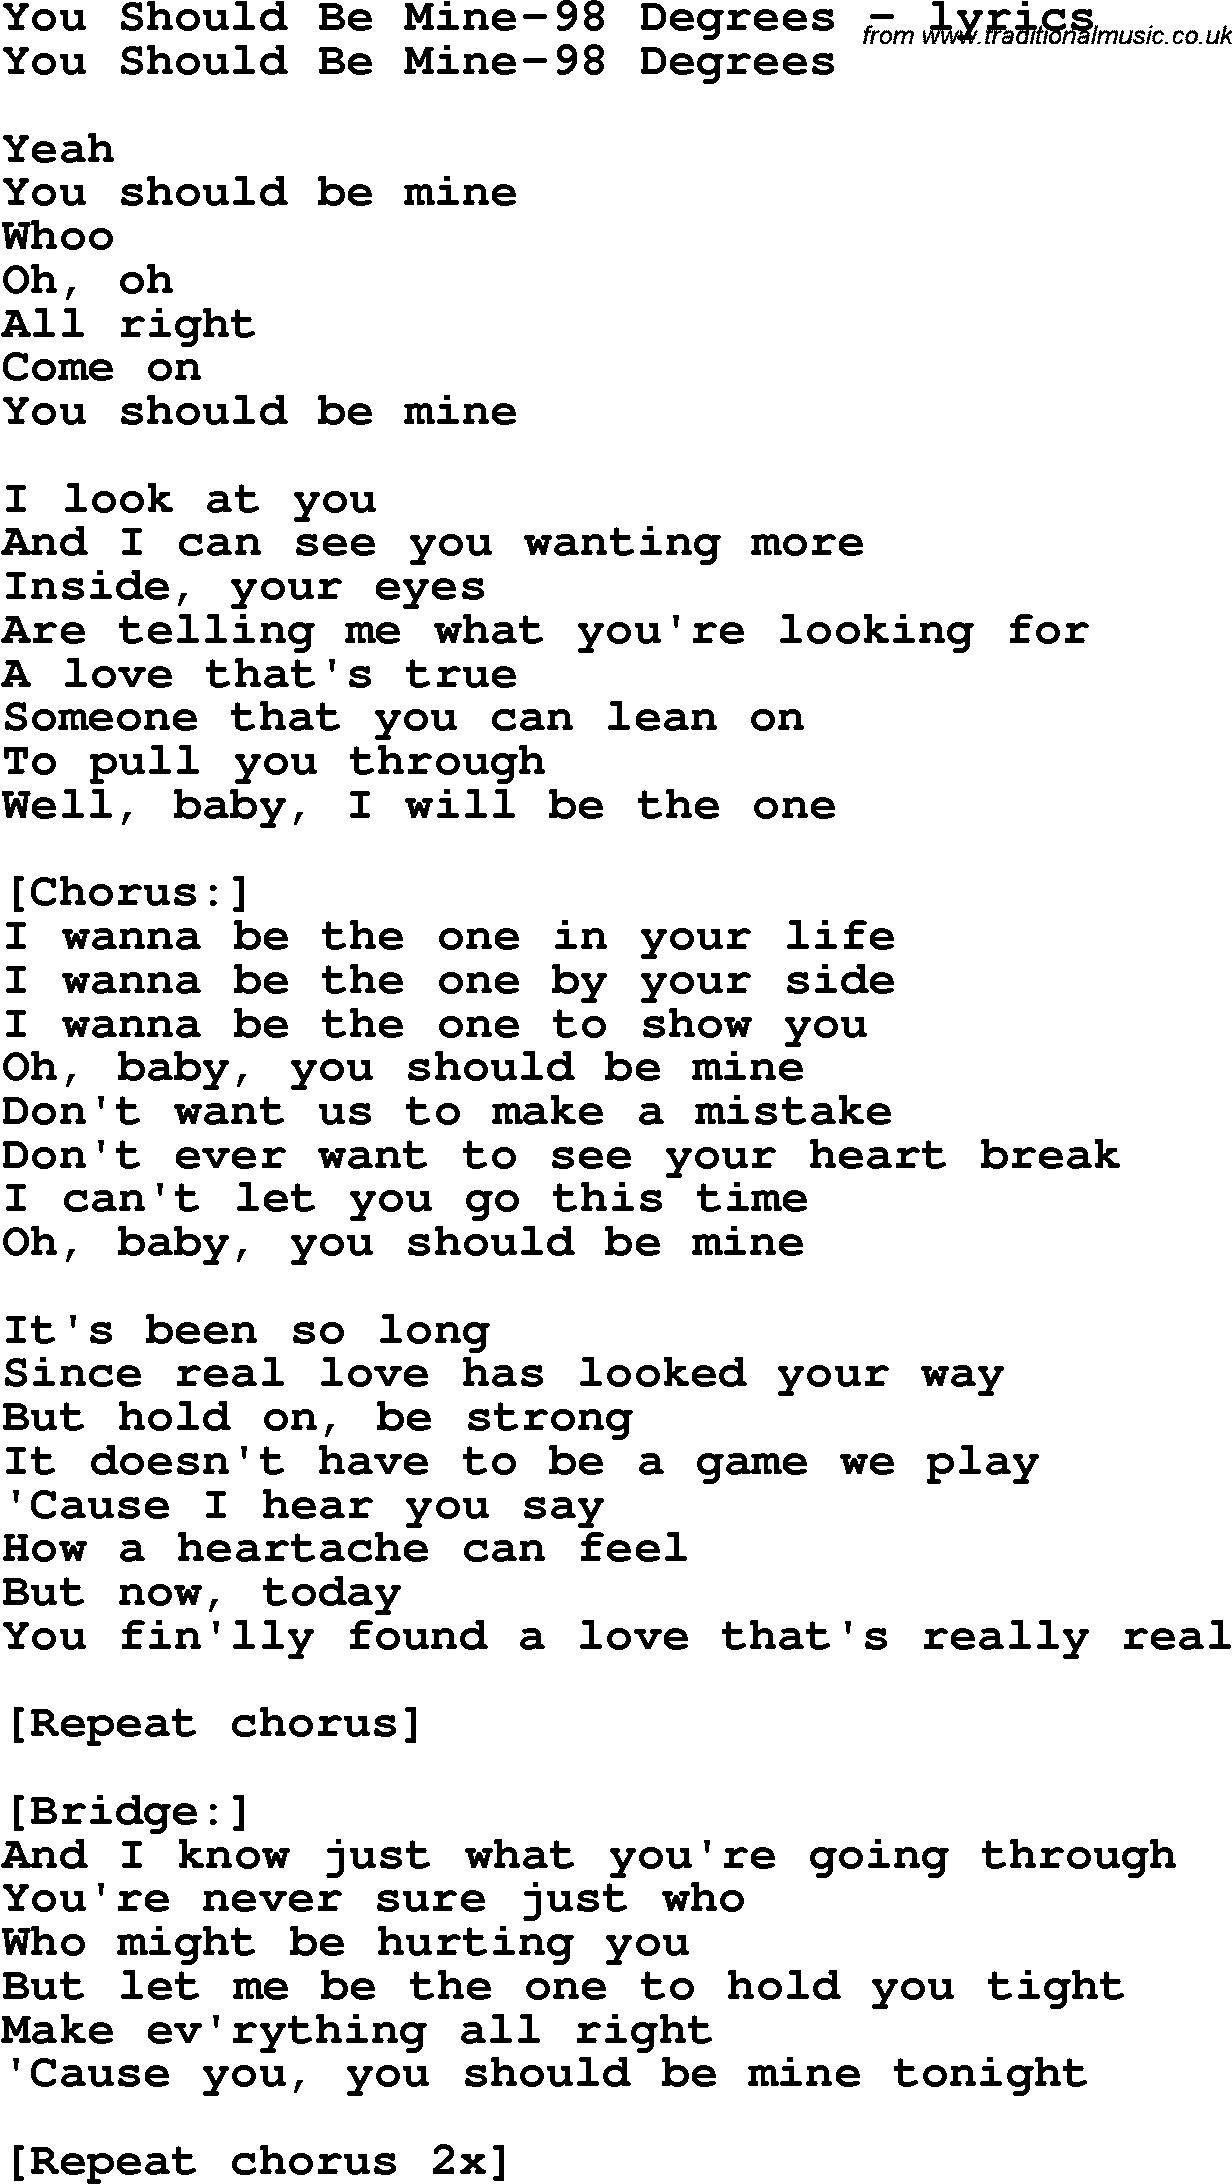 Love Song Lyrics for: You Should Be Mine-98 Degrees